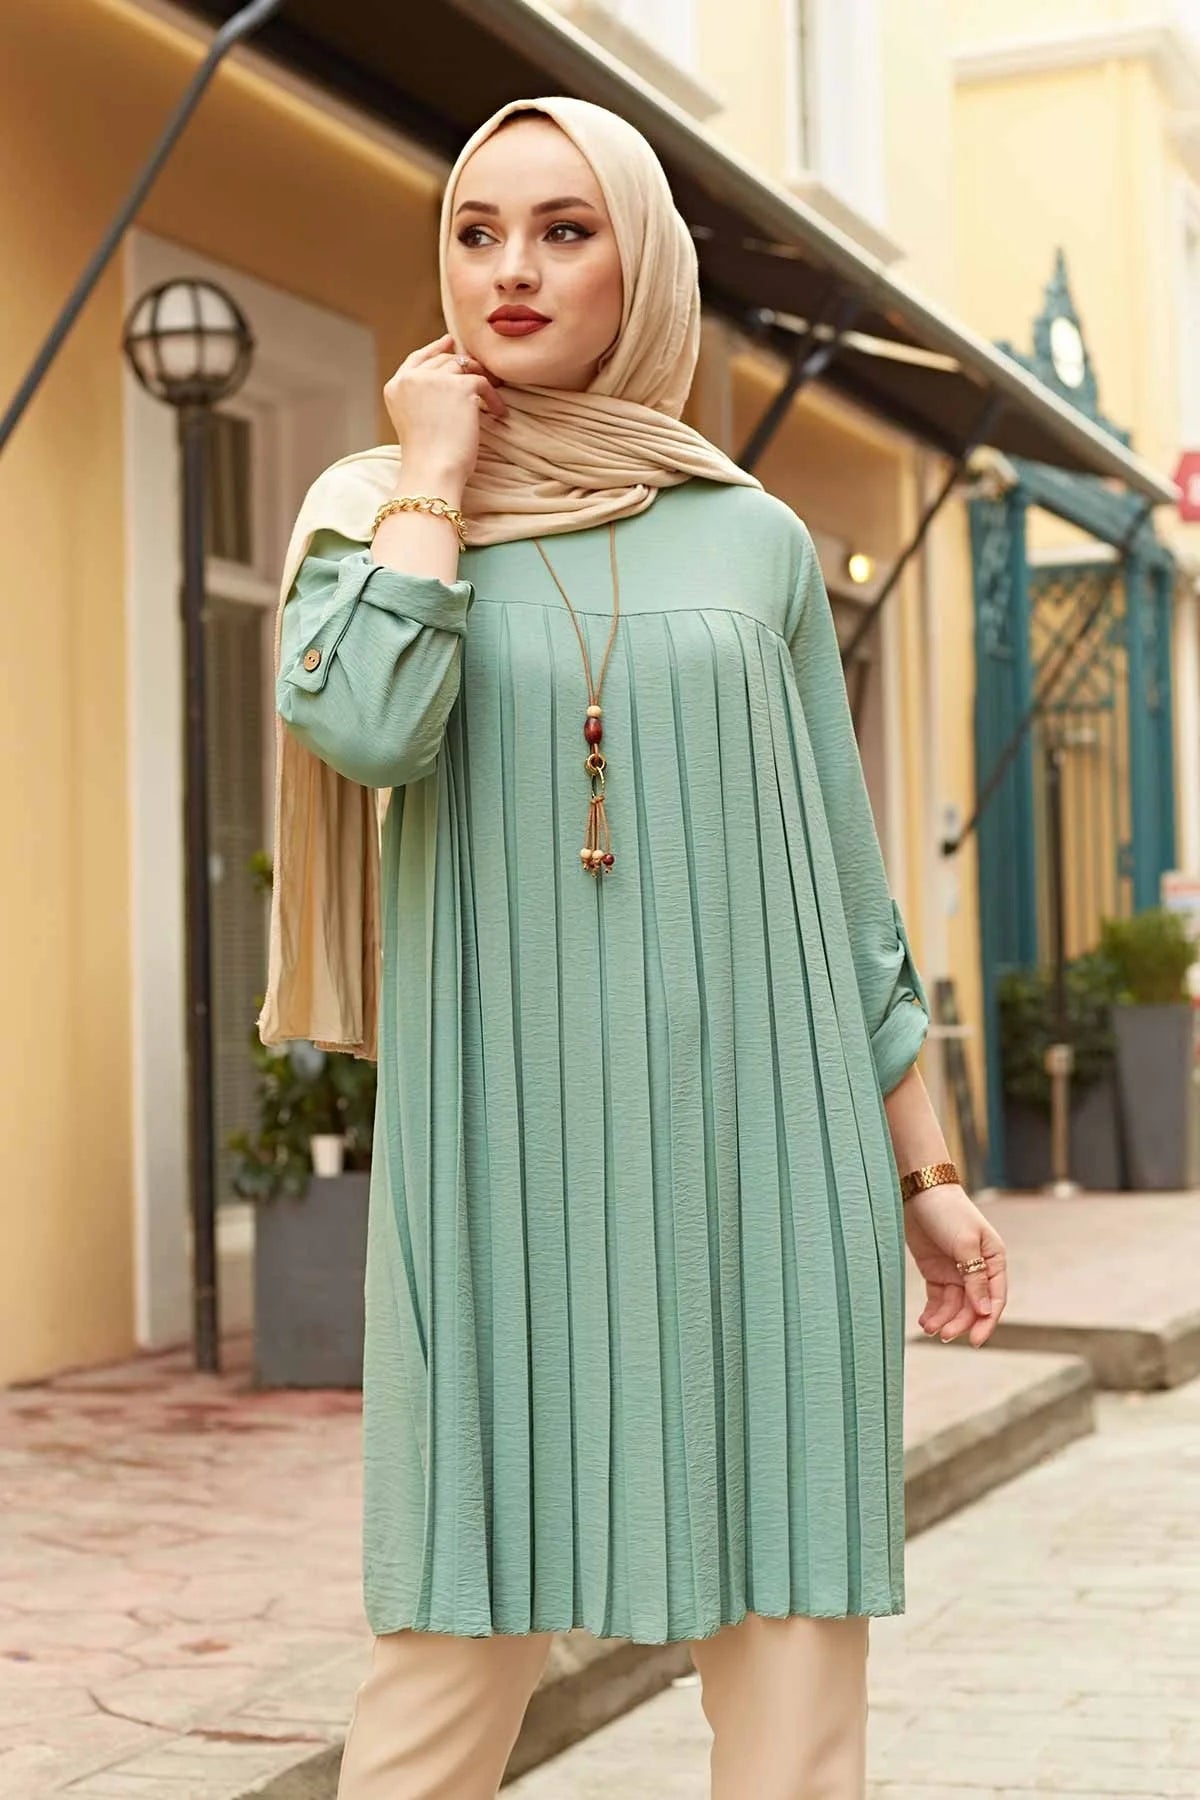 Pleated Girl's Blouse Shirt Adjustable Sleeve Women Top Islamism Blouses for Muslim Women Many Colors Muslim Fashion Women